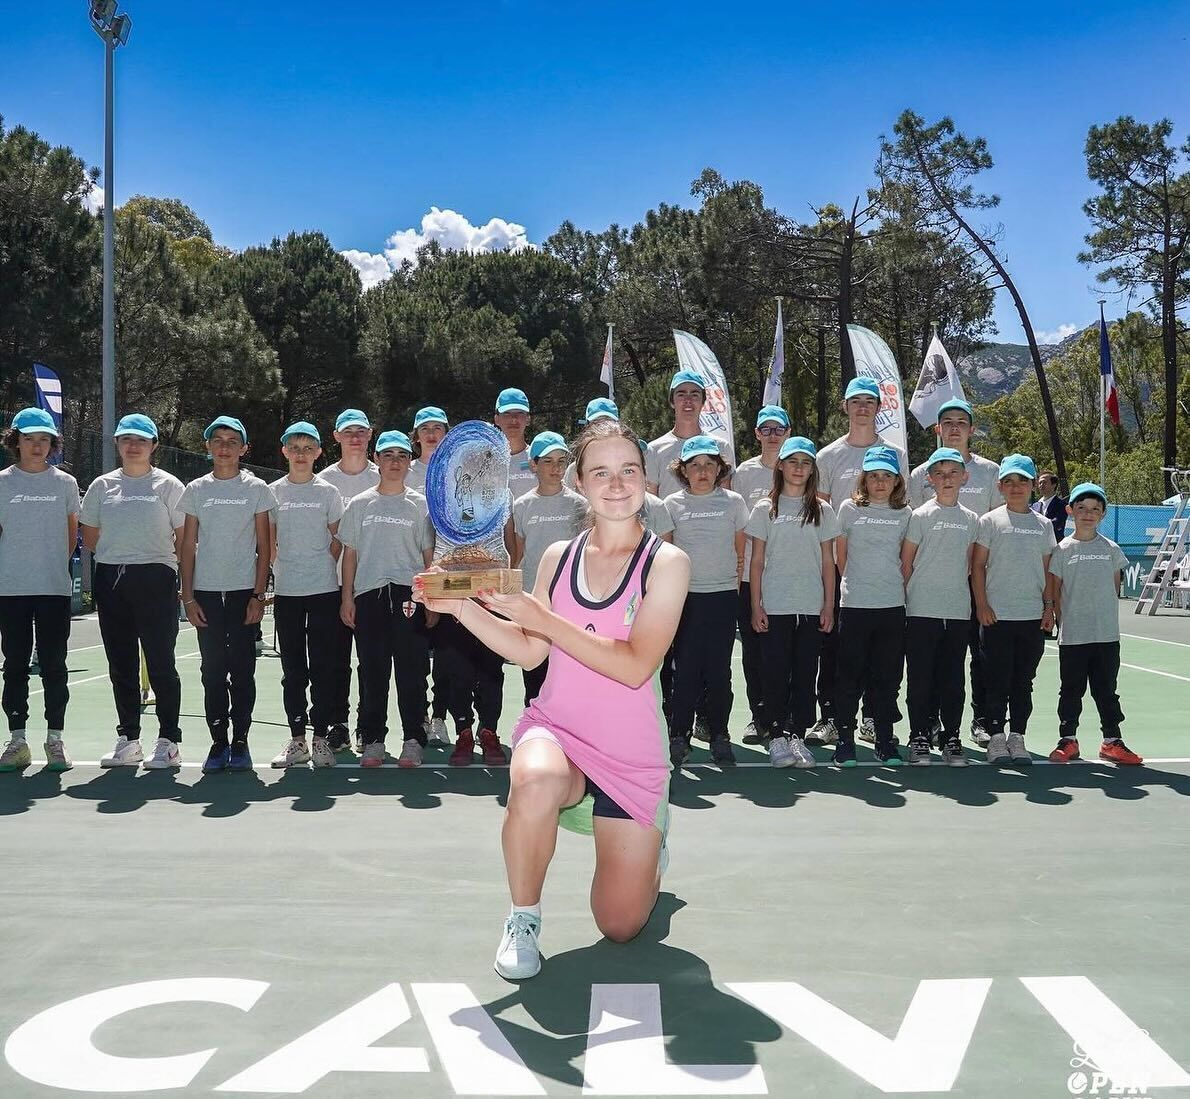 The Ukrainian tennis player took out four Russian women and won a tournament in Georgia. Video